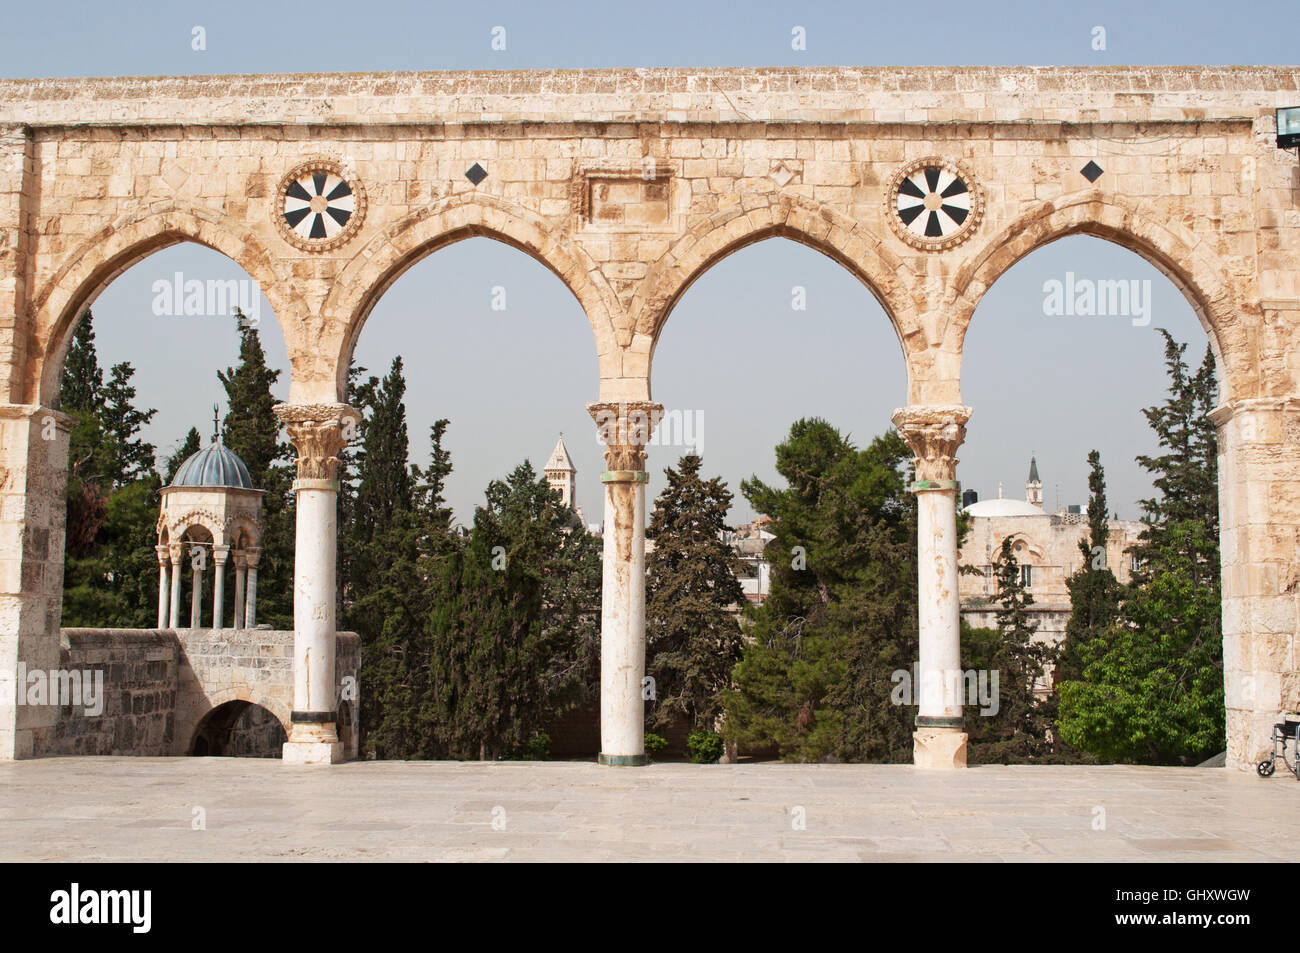 Jerusalem: the causeway with arches on Temple Mount (known to Muslims as the Haram esh-Sharif), one of the most important religious sites in the world Stock Photo